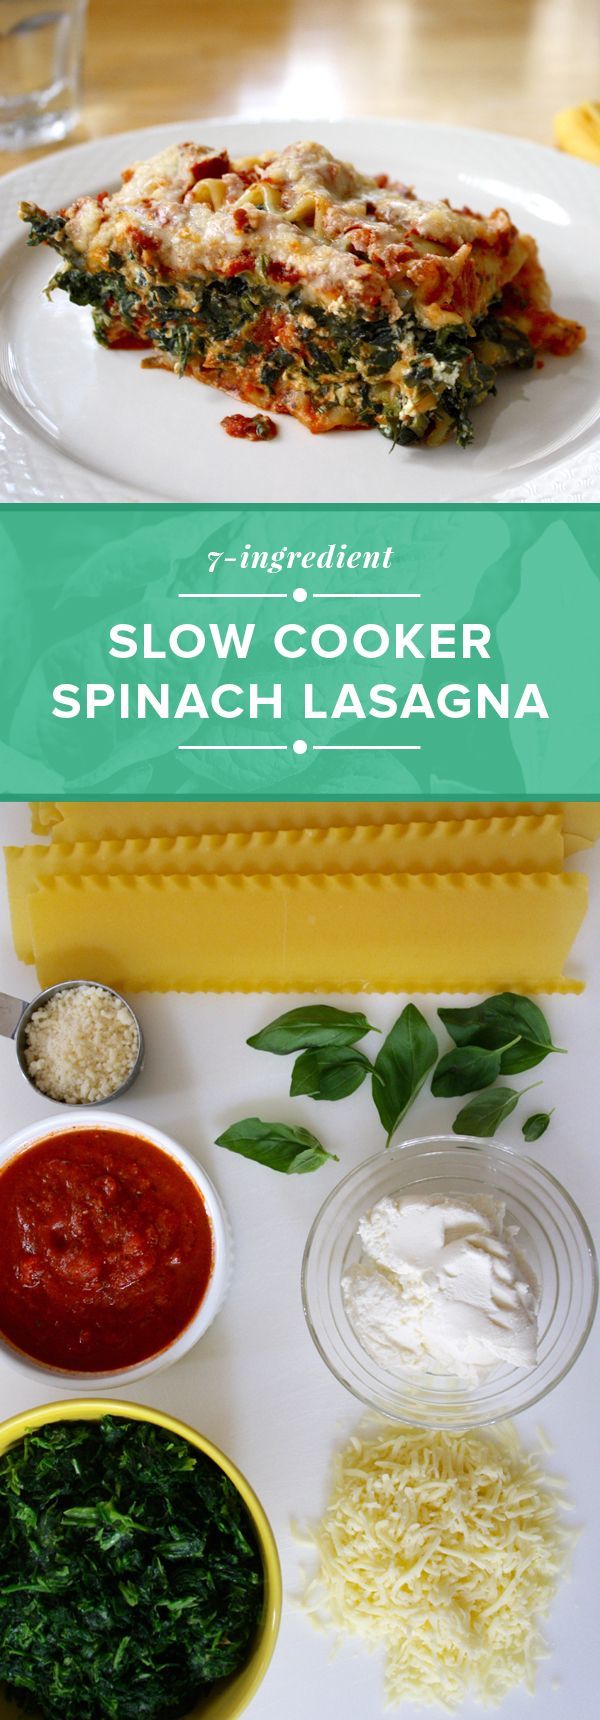 A 7-ingredient slow-cooker lasagna recipe that actually works! -   20 spinach recipes crockpot
 ideas